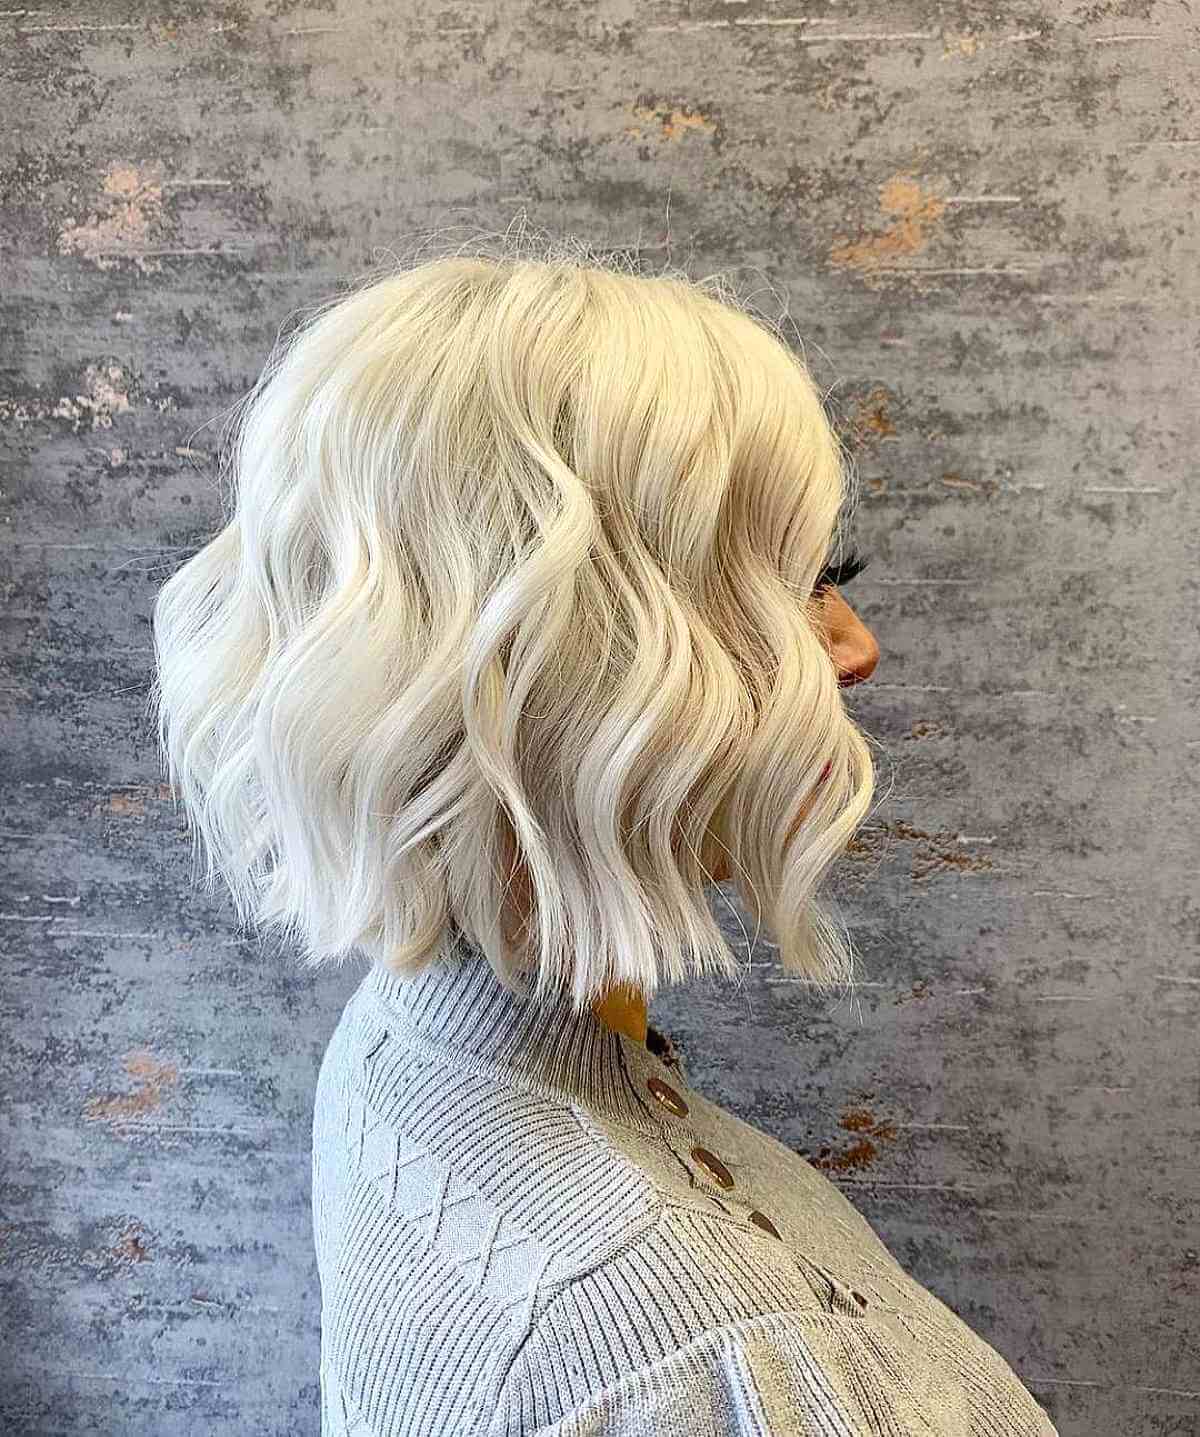 17 Cutest Short Haircuts for Thick, Wavy Hair to Style More Easily